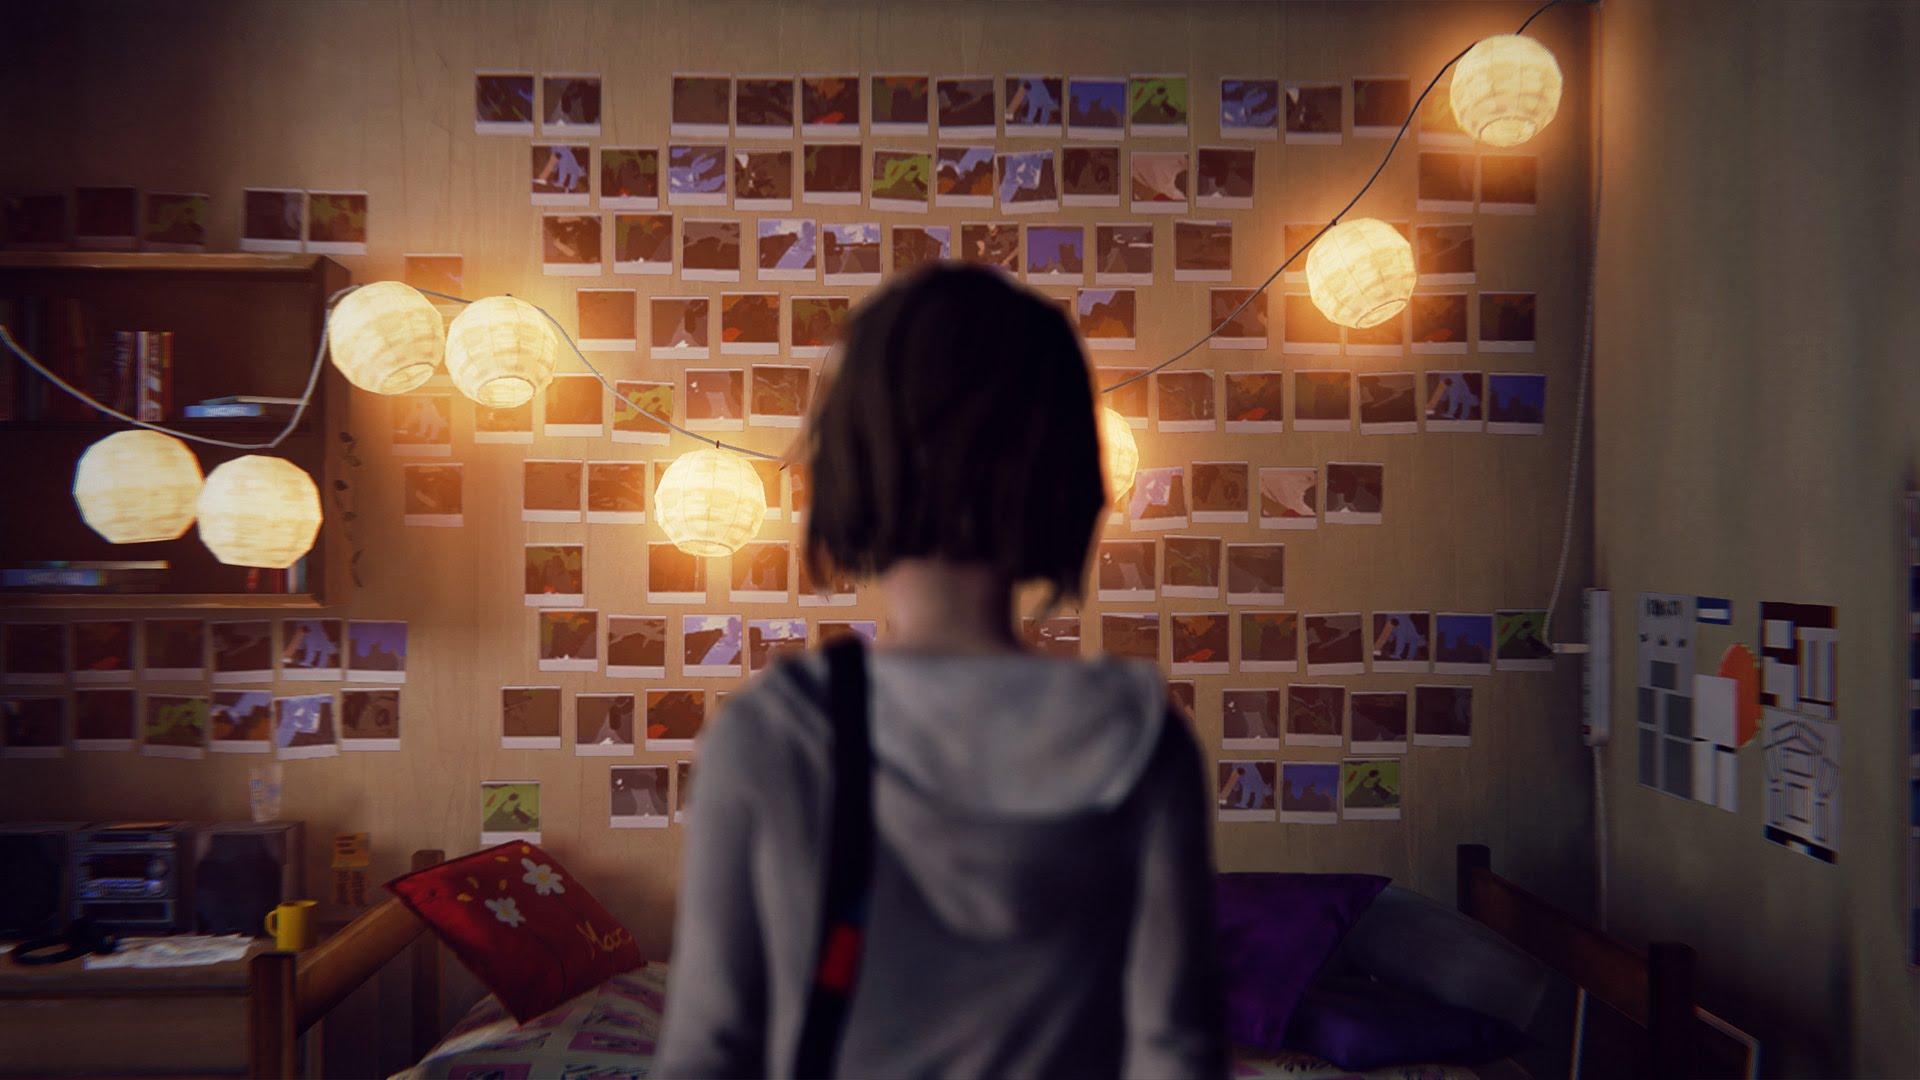 Life Is Strange Backgrounds, Compatible - PC, Mobile, Gadgets| 1920x1080 px